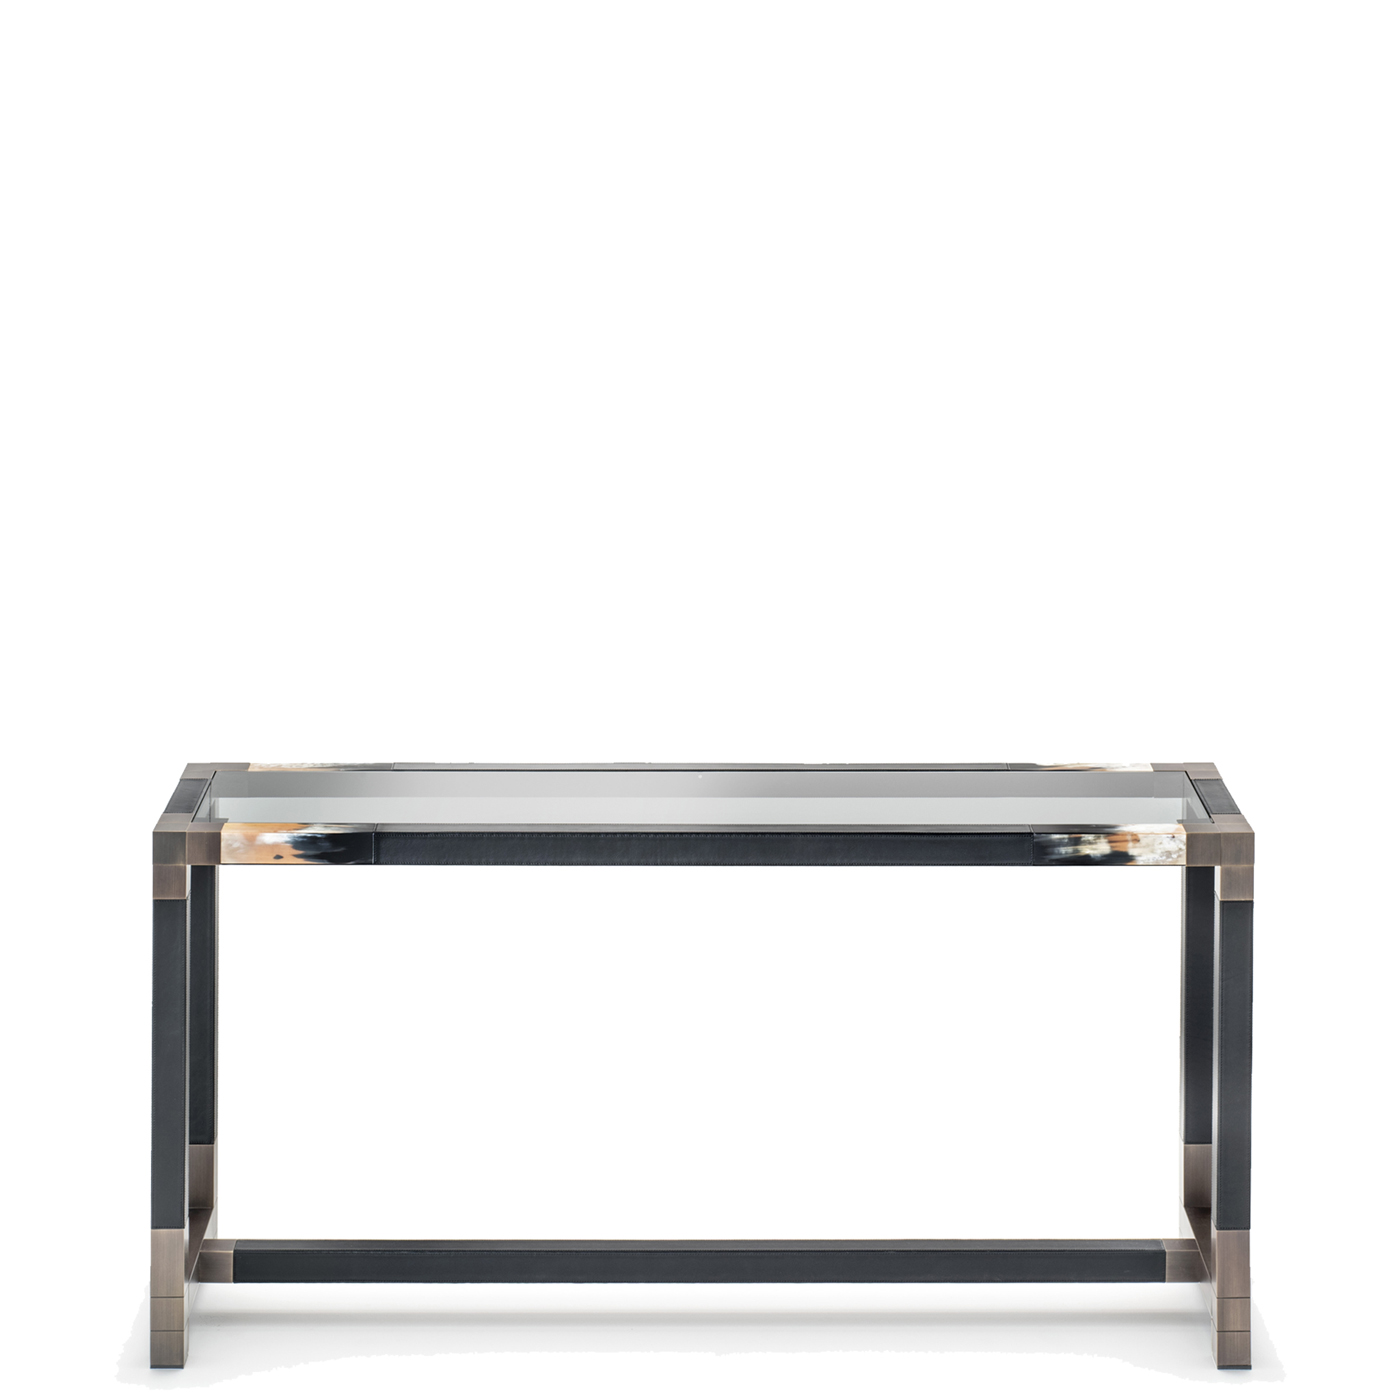 Tables and console tables - Alcamo console table in black leather, horn and burnished brass - Arcahorn